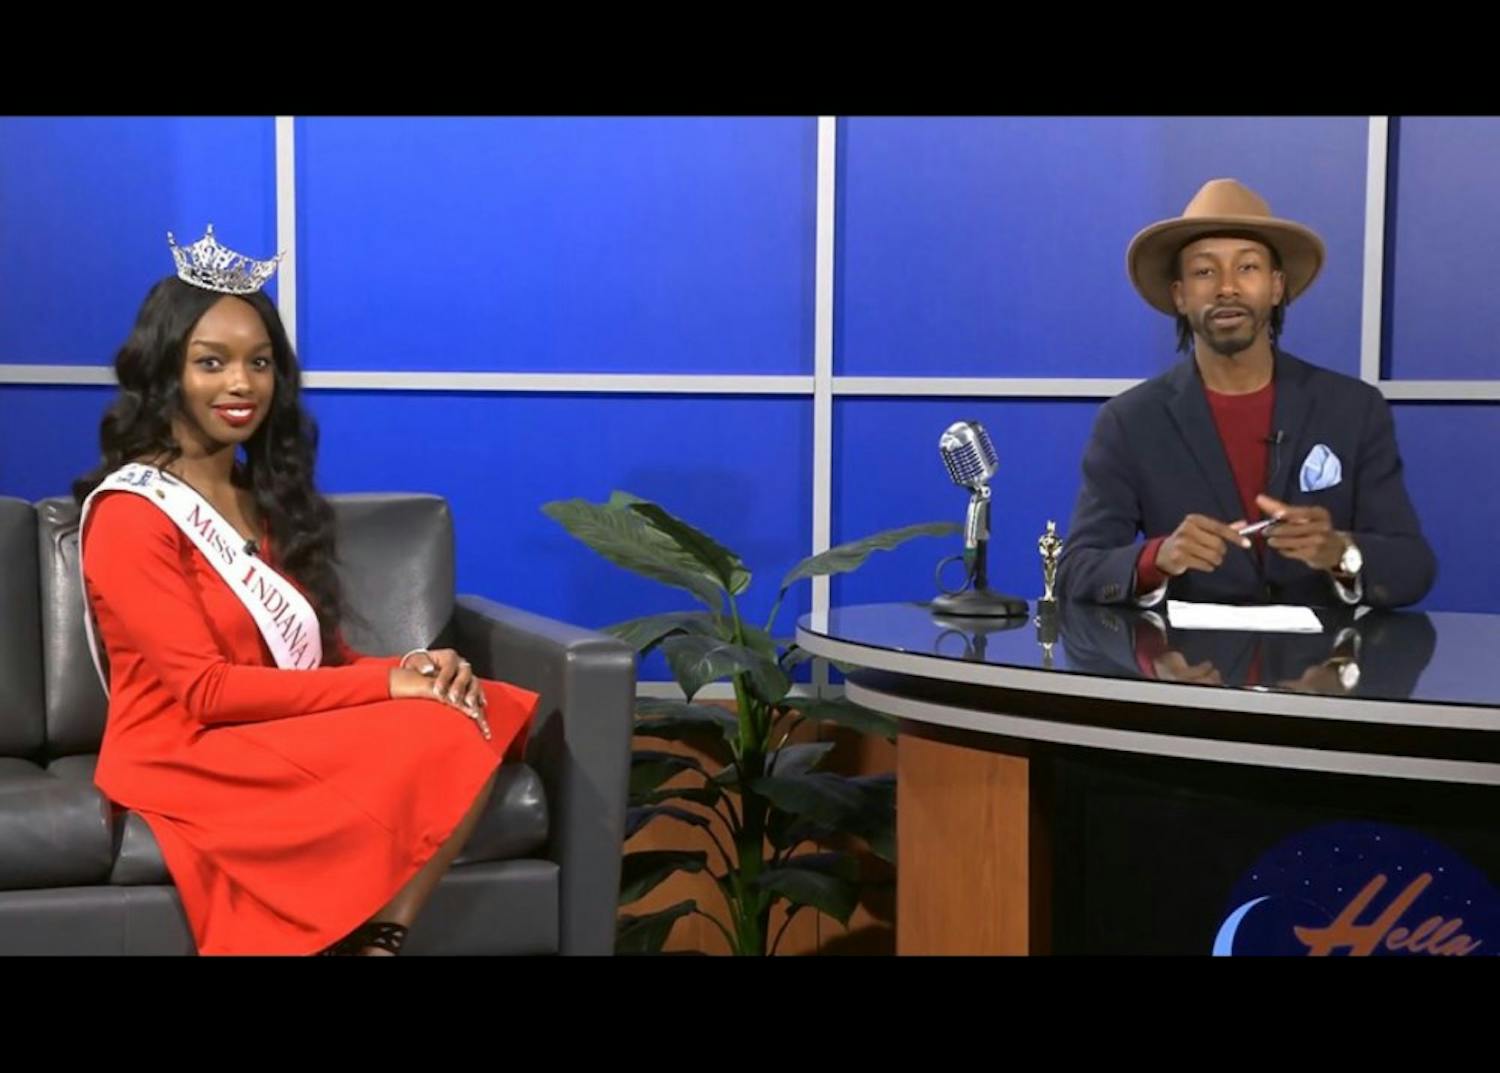 Rob Sherrell interviews A'Niyah Birdsong, Miss Indiana University 2017, on "Hella Late" in spring 2017. Sherrell featured many prominent, diverse IU students as guests on his show.